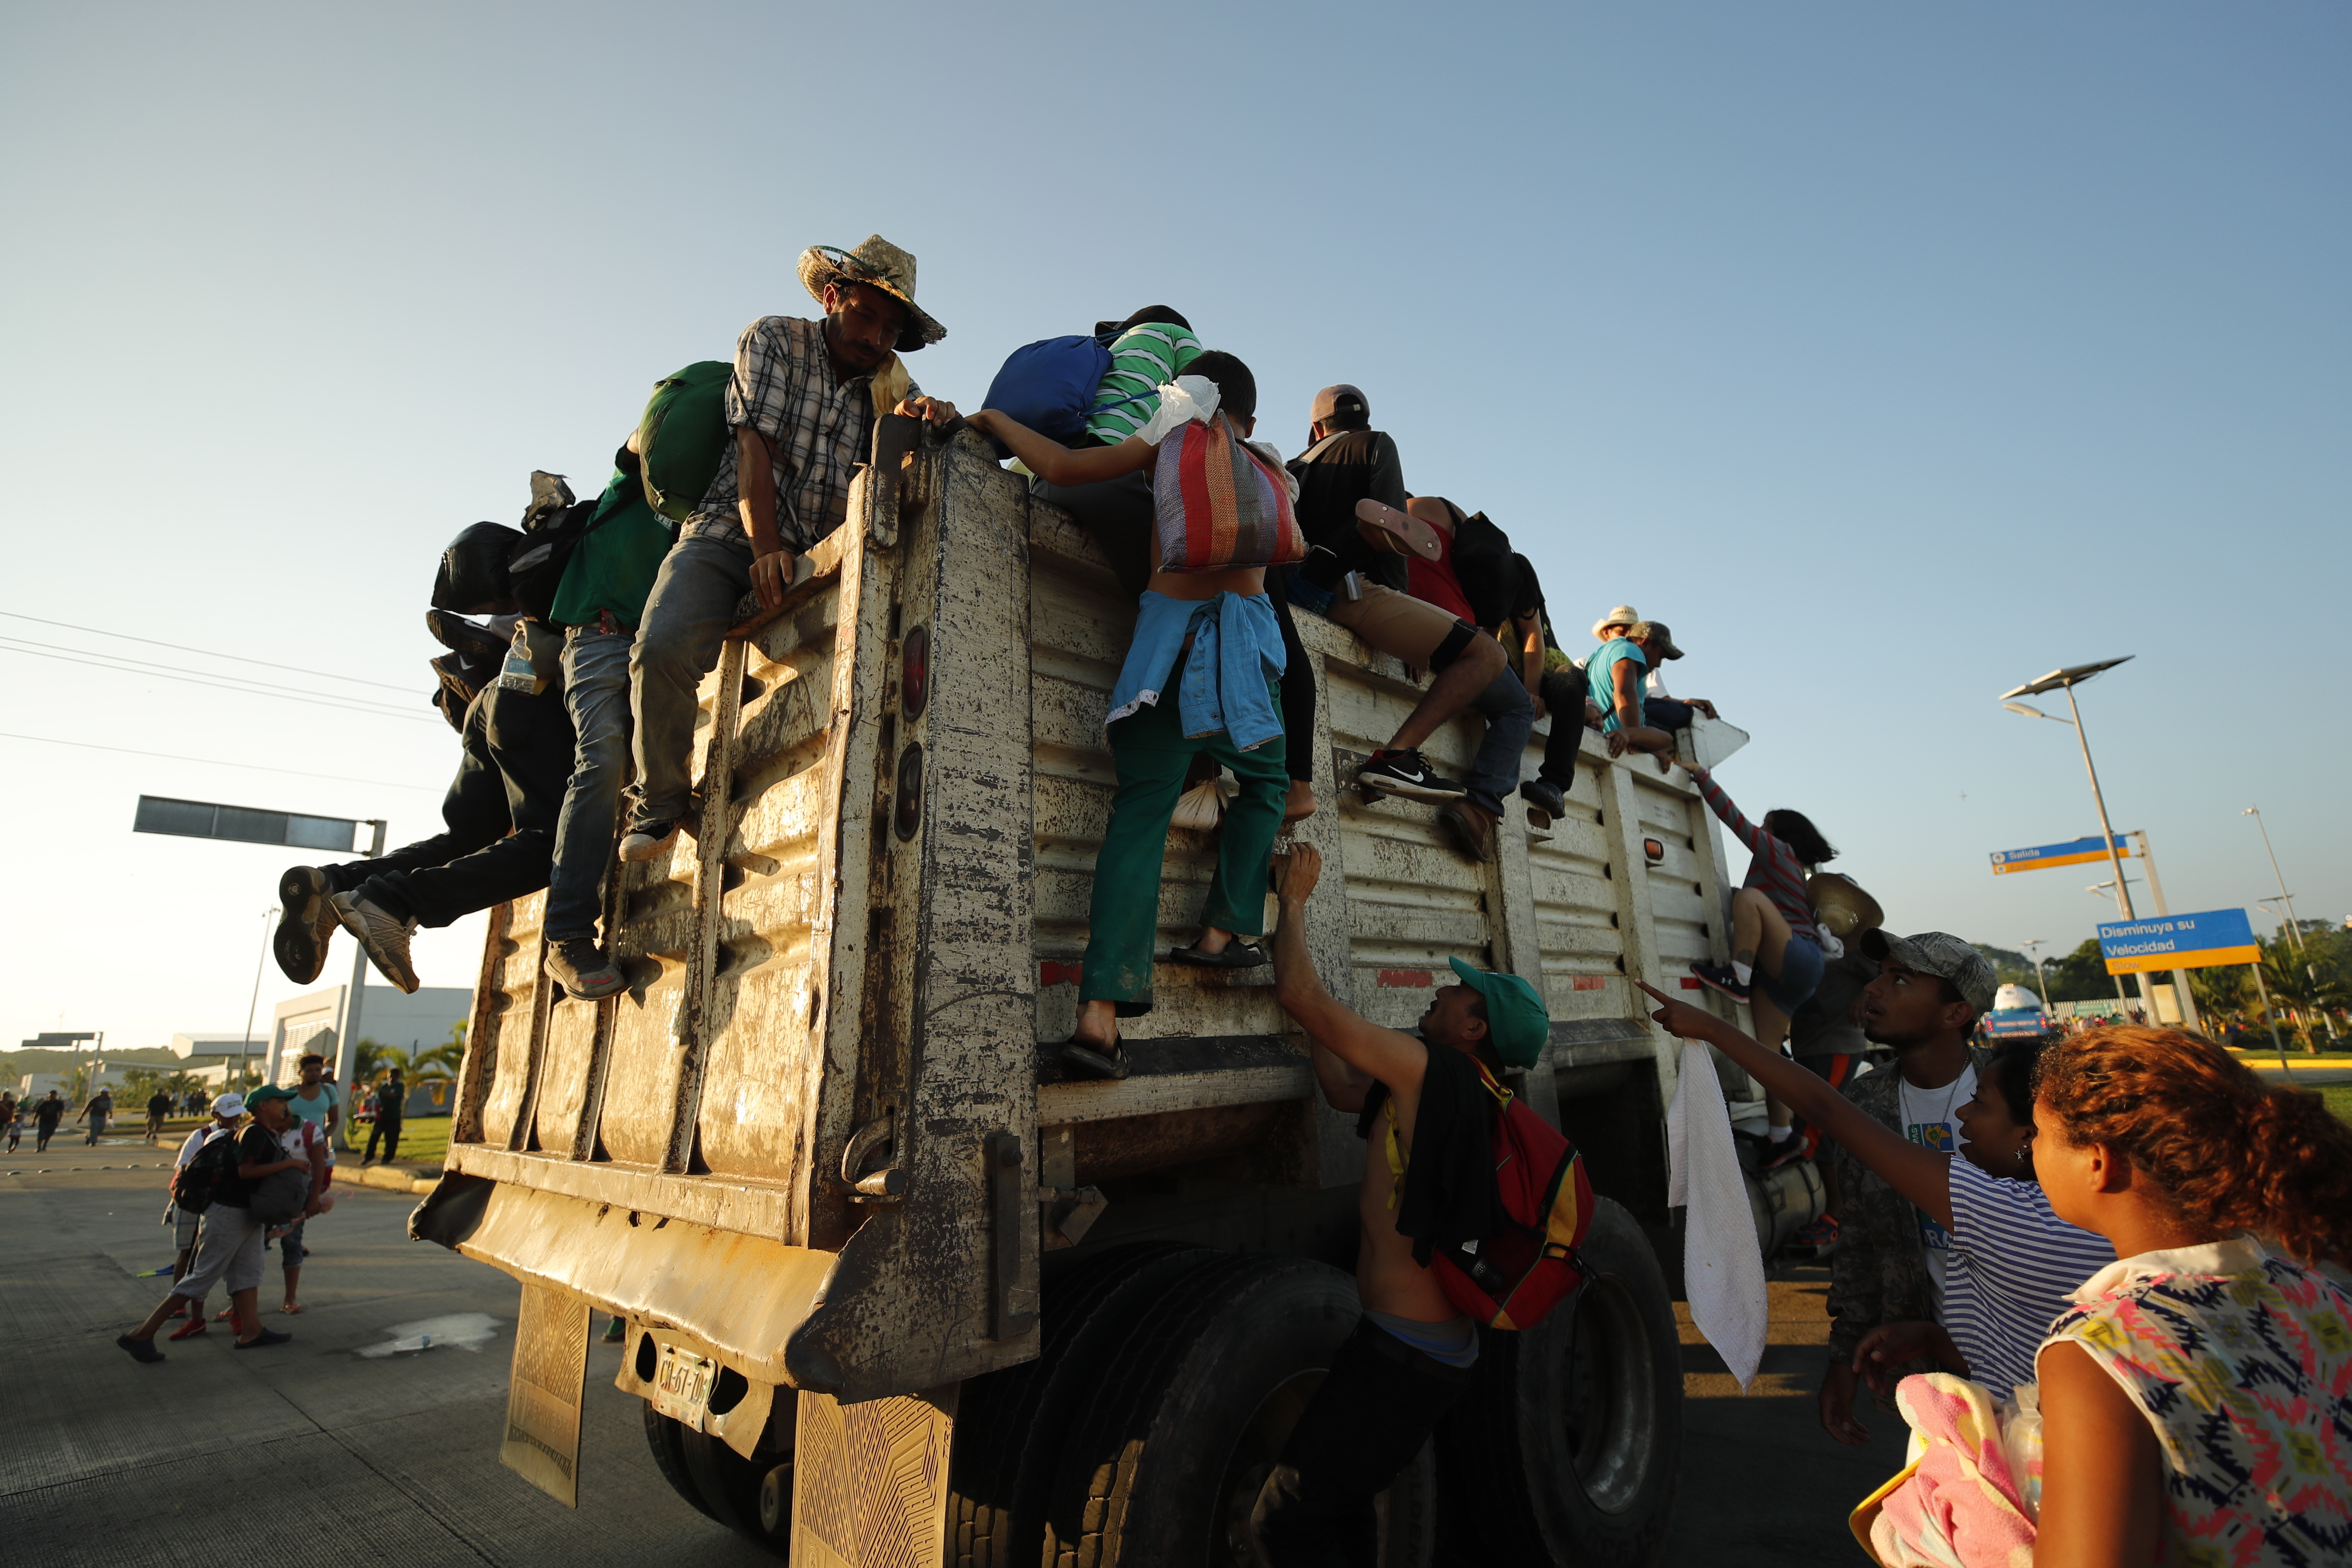 epa07116442 Honduras migrants climb onto a truck as they begin another day of traveling toward to USA from town of Huixtla, Chiapas state, Mexico, 24 October 2018. Thanks to their faith in God and despite his harsh rhetoric, the migrants believe that the president of the United States, Donald Trump, will allow the entrance of the Central American caravan to the United States. More than 7,000 people are part of the caravan of Central American migrants that is heading towards the United States, according to a recent estimate released by the United Nations.  EPA/JOSE MENDEZ